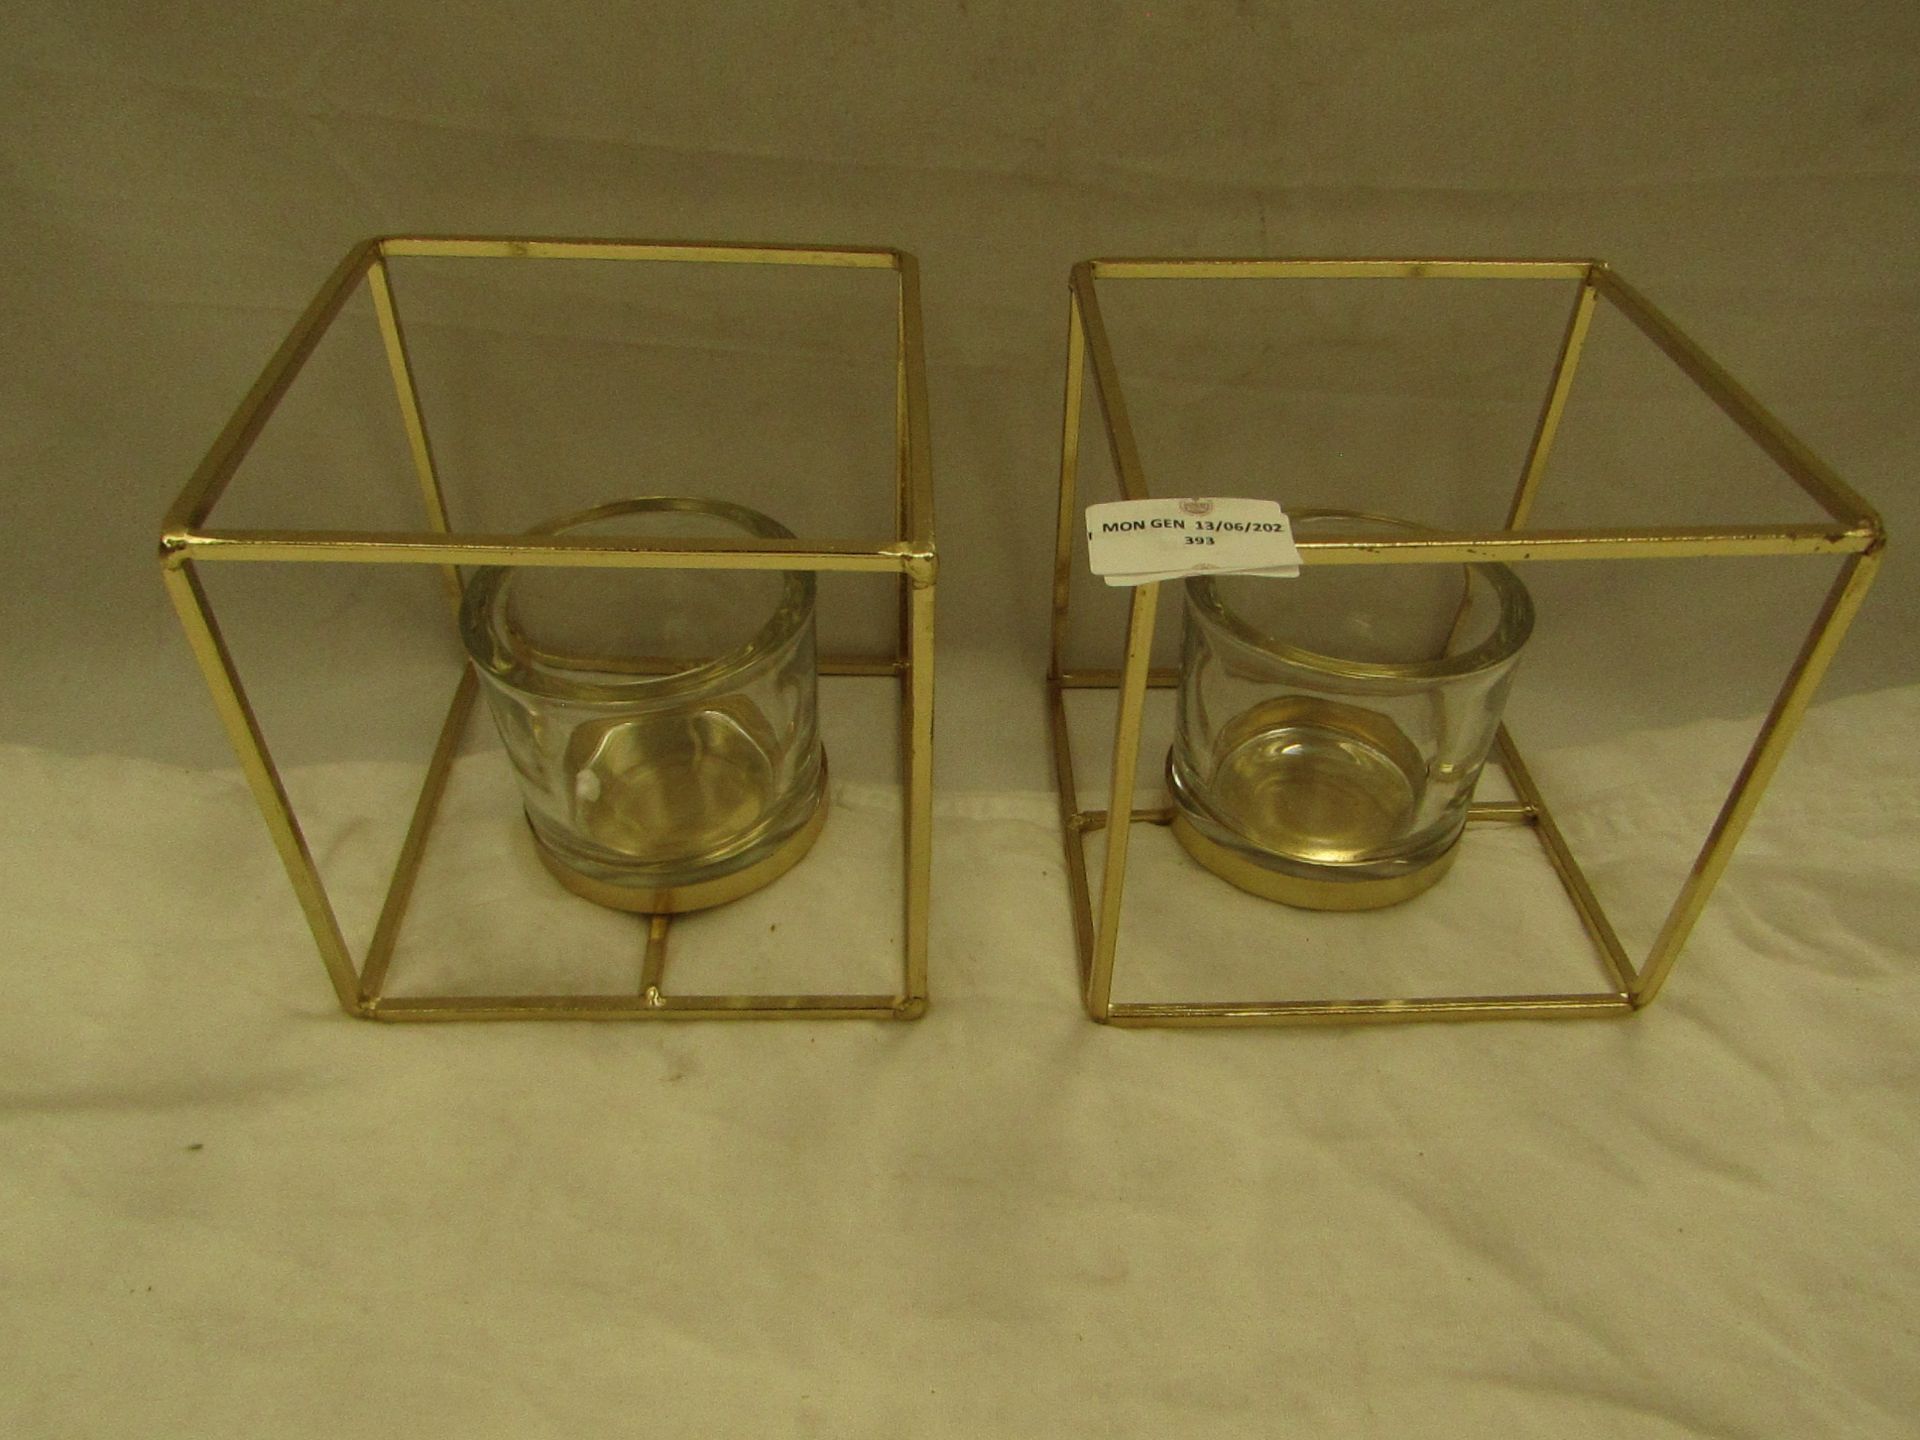 2x Metal Square Glass Tealight Candle Holders - Good Condition.